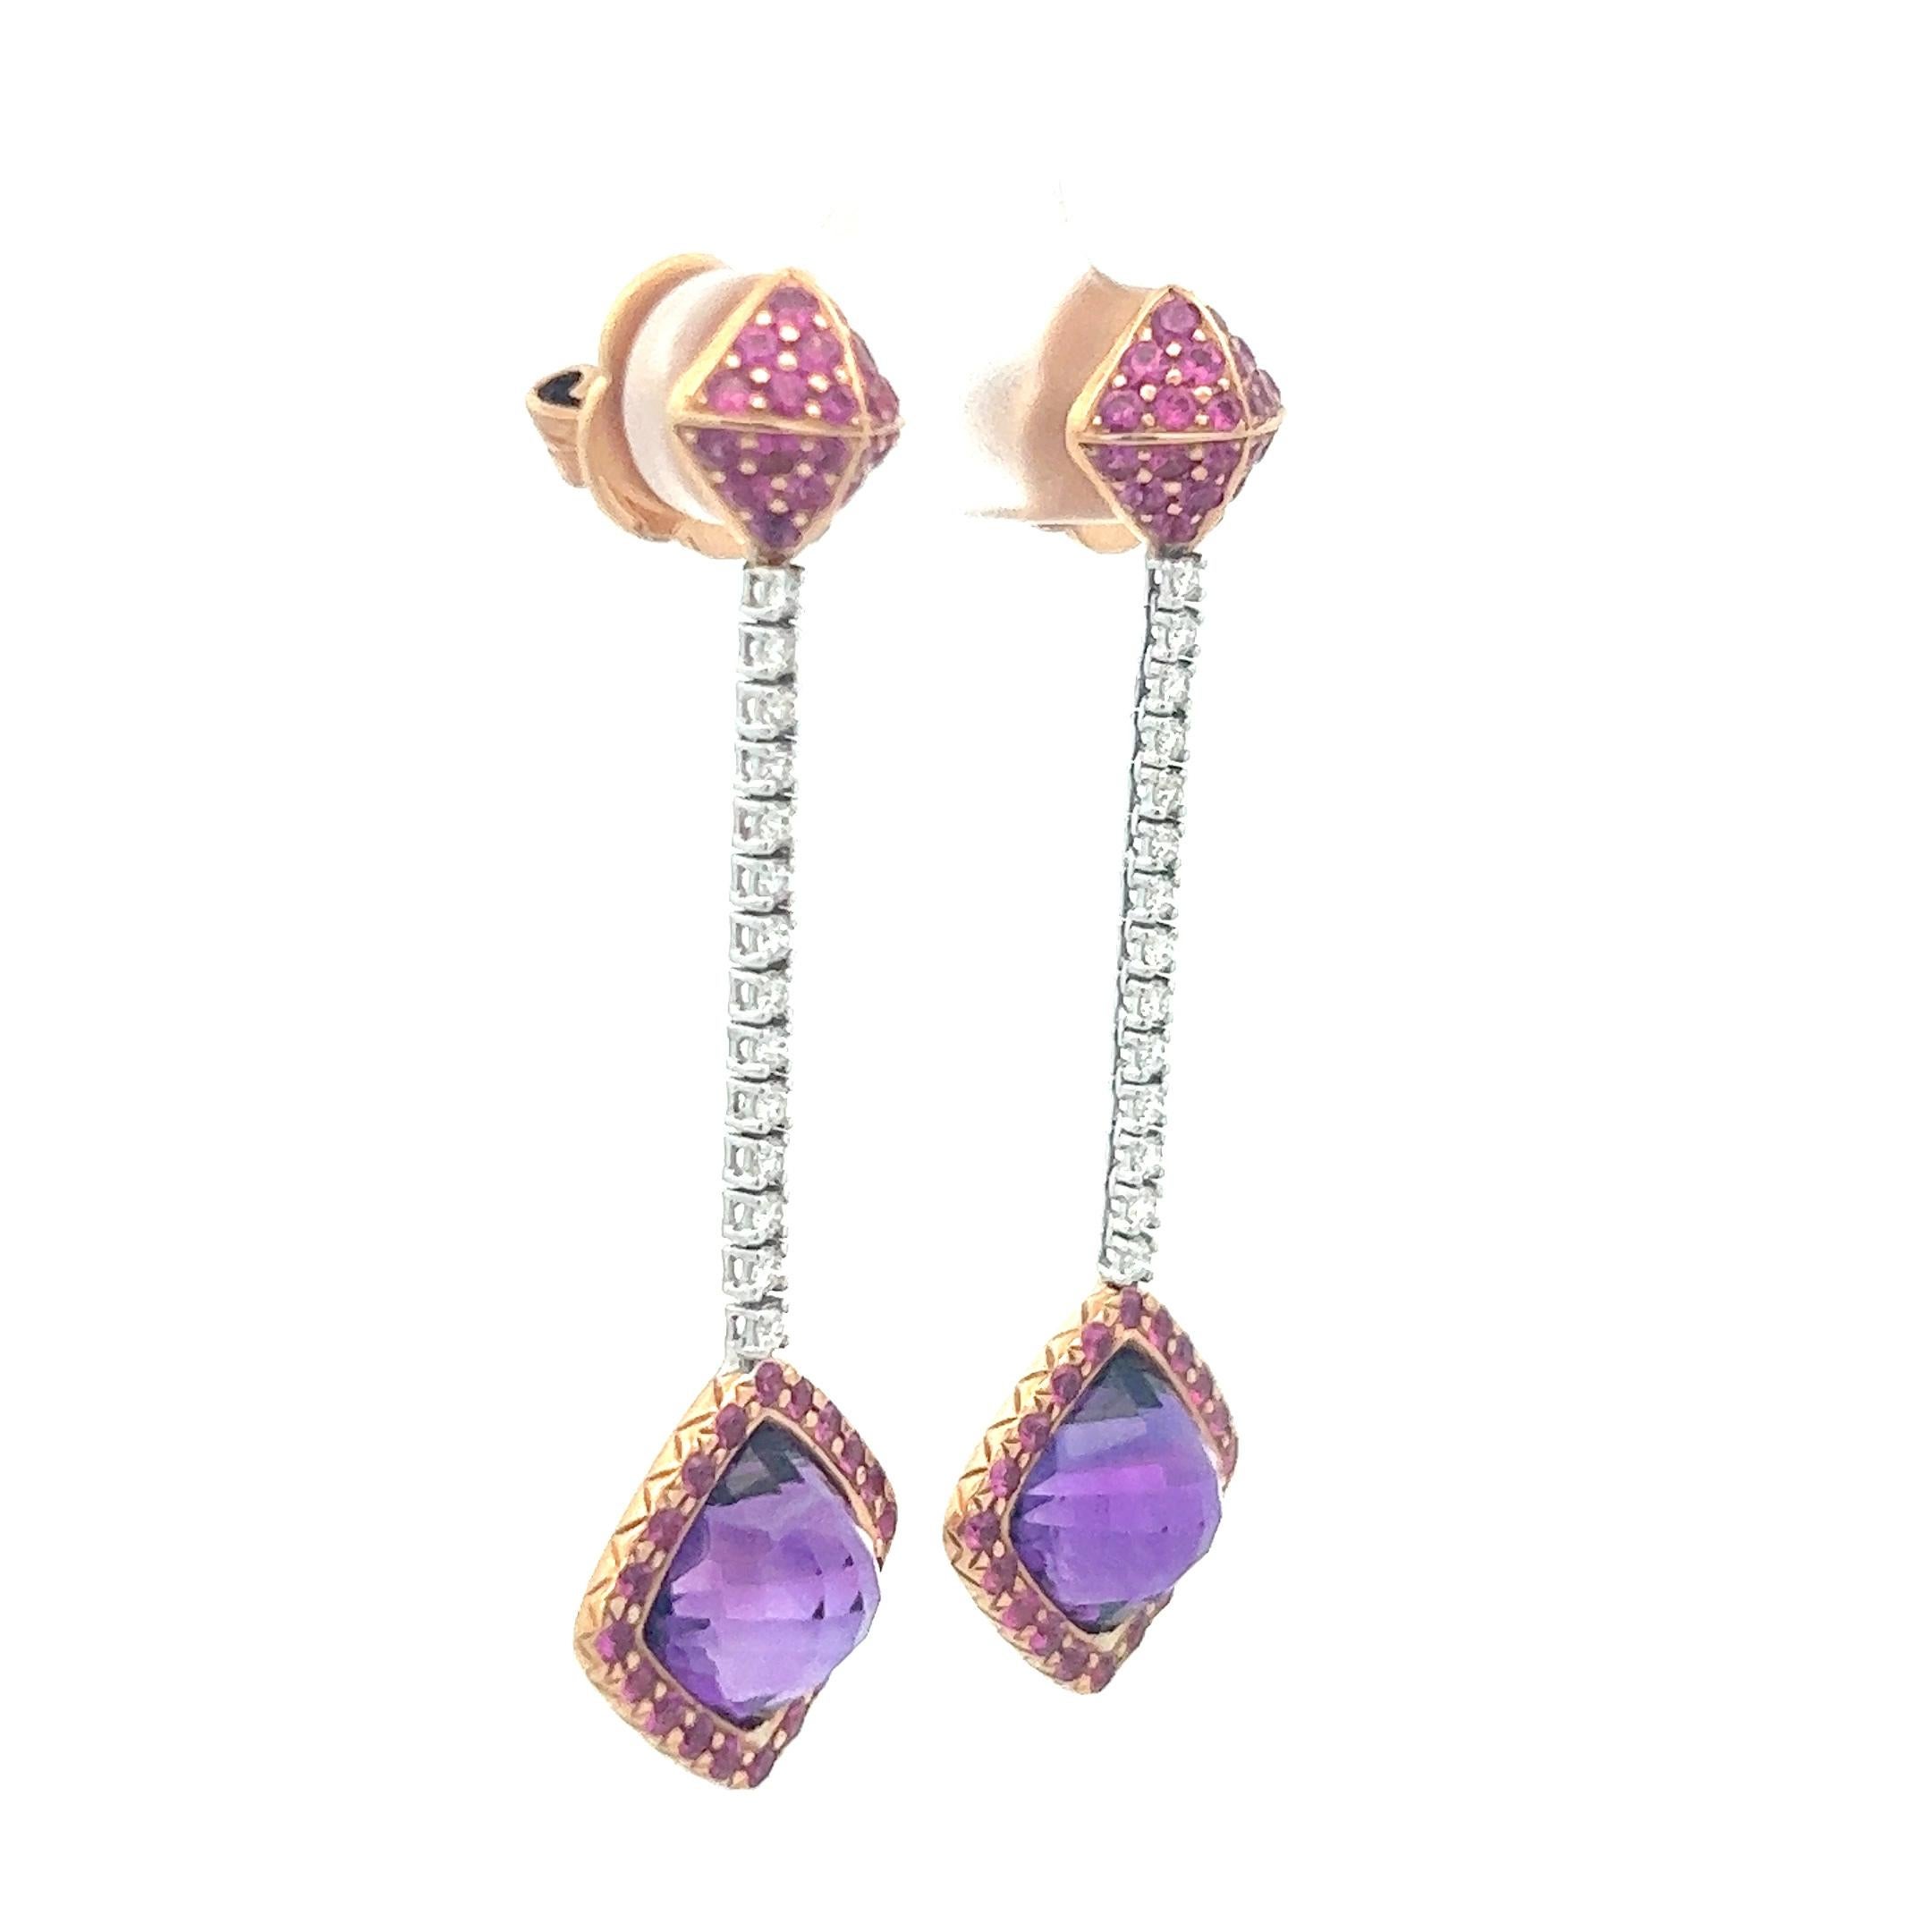 A remarkable pair of 18k rose gold earrings featuring fancy cut amethyst, rubies, and diamonds by designer Richard Krementz. Krementz founded his jewelry business in 1866 after immigrating from Germany. He was one of the first to travel to Myanmar,